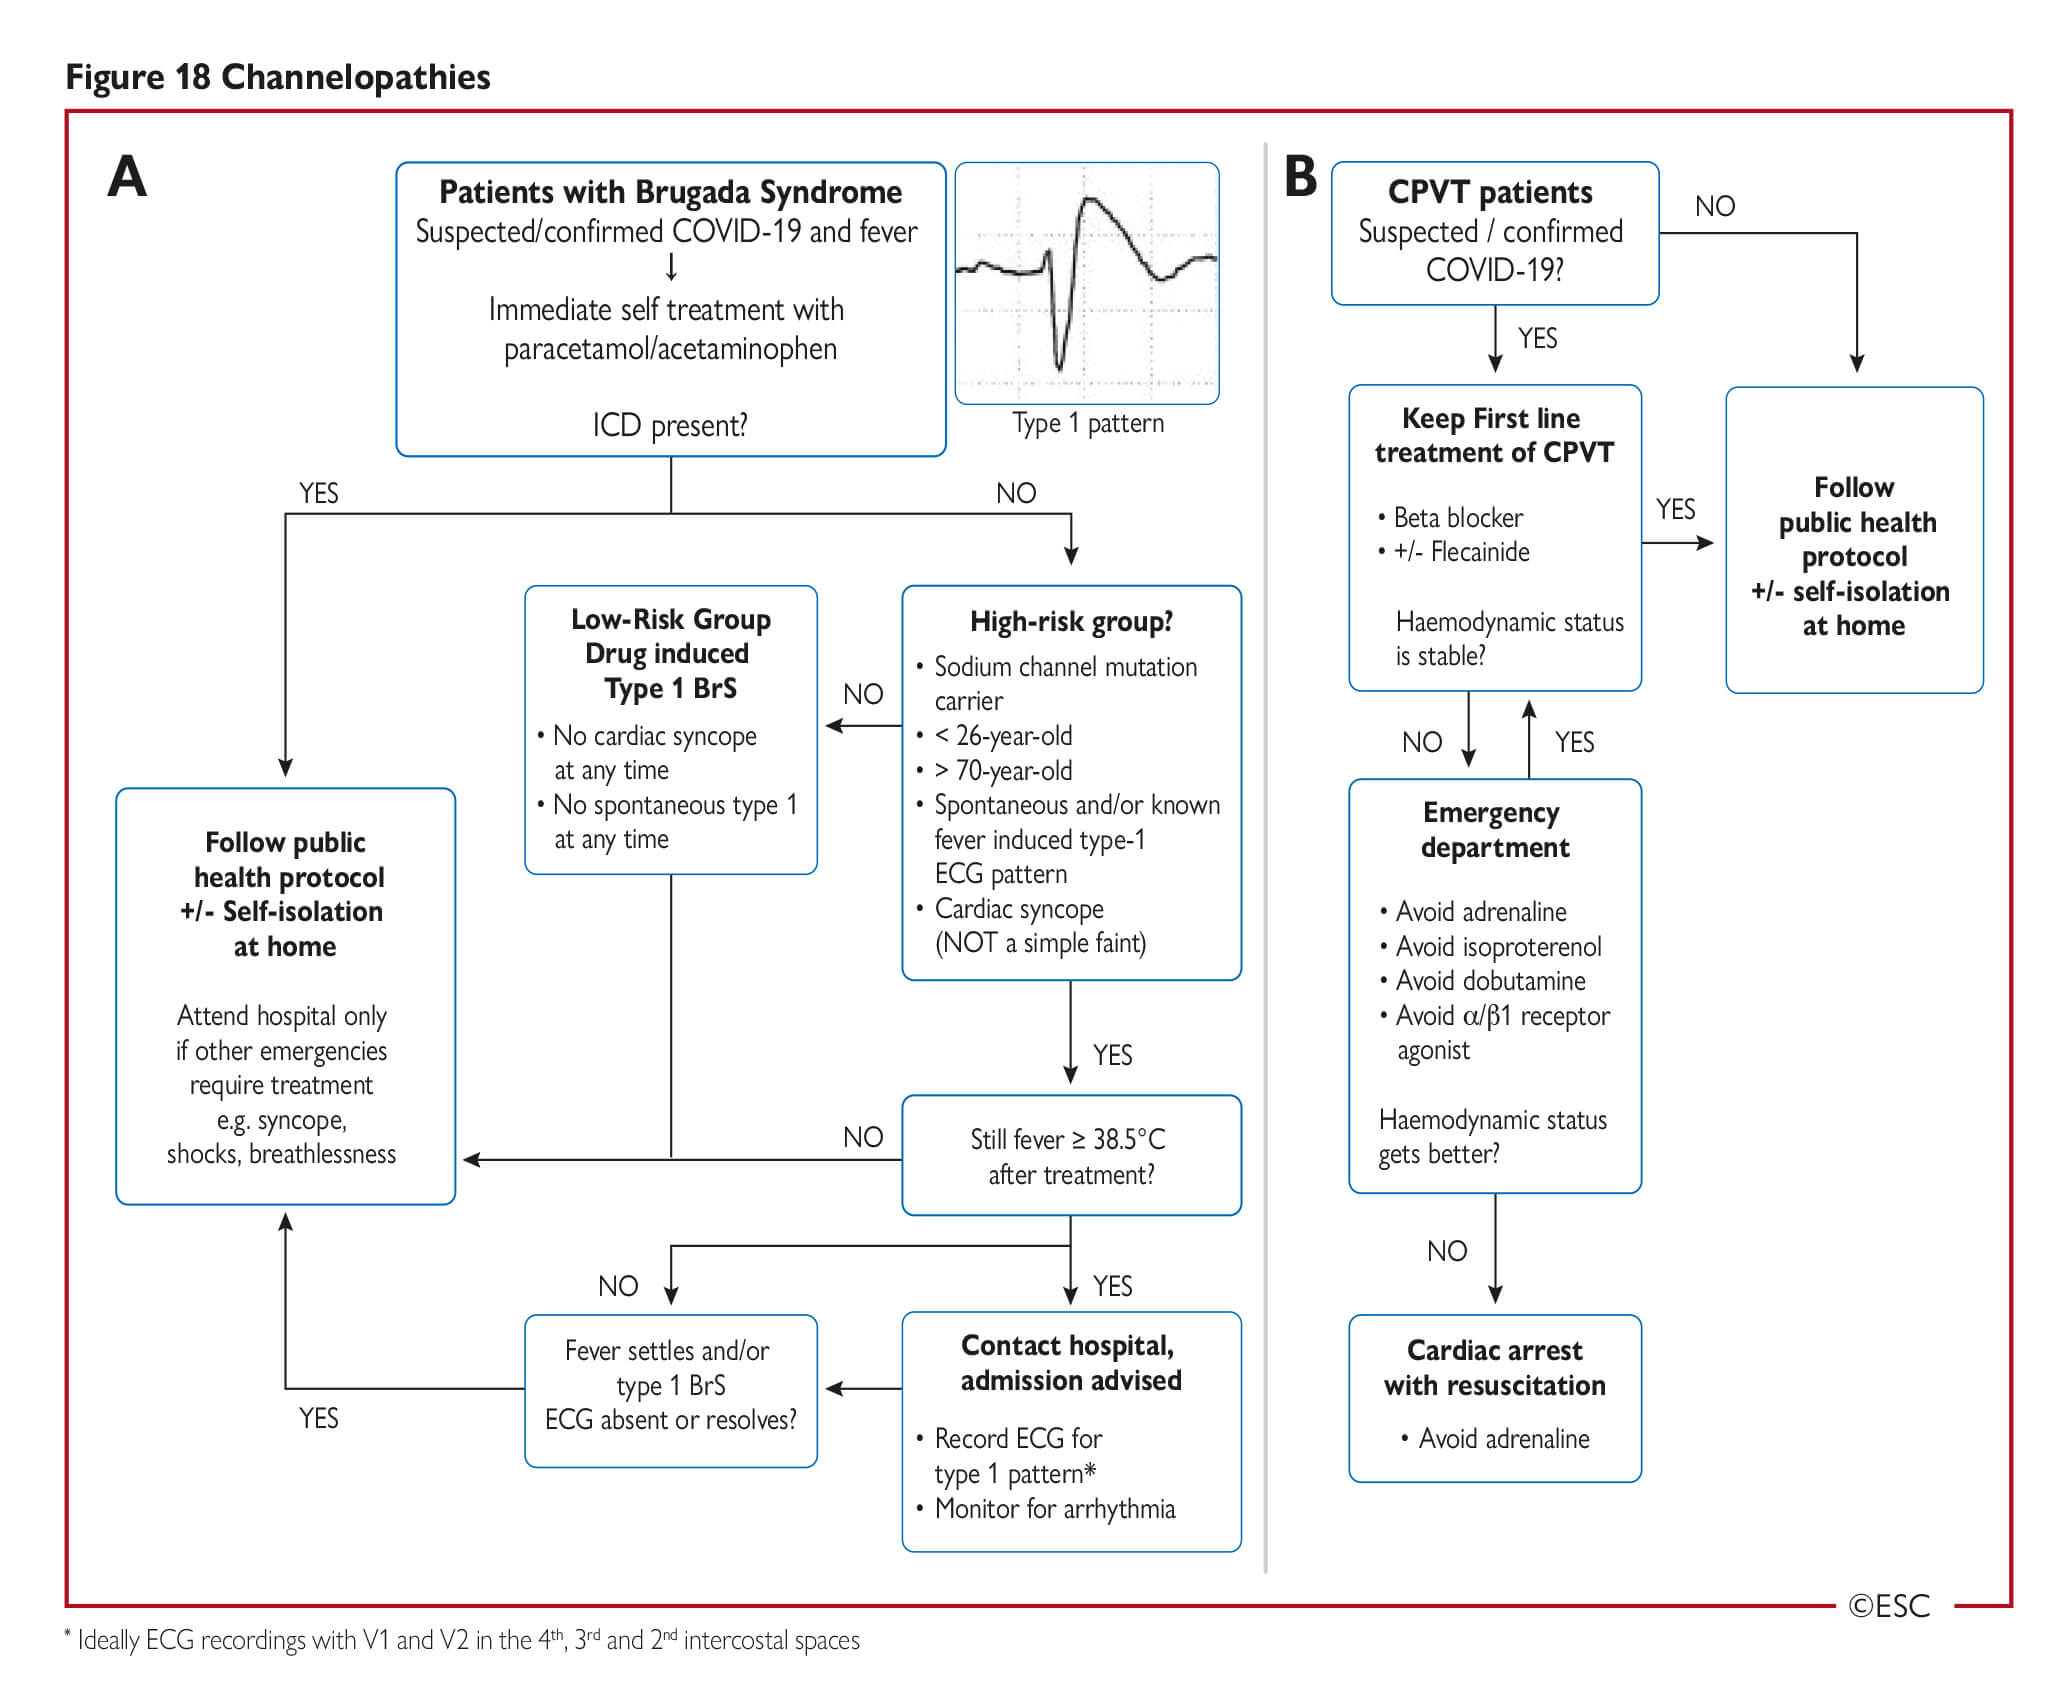 Esc Guidance For The Diagnosis And Management Of Cv Disease During The Covid 19 Pandemic